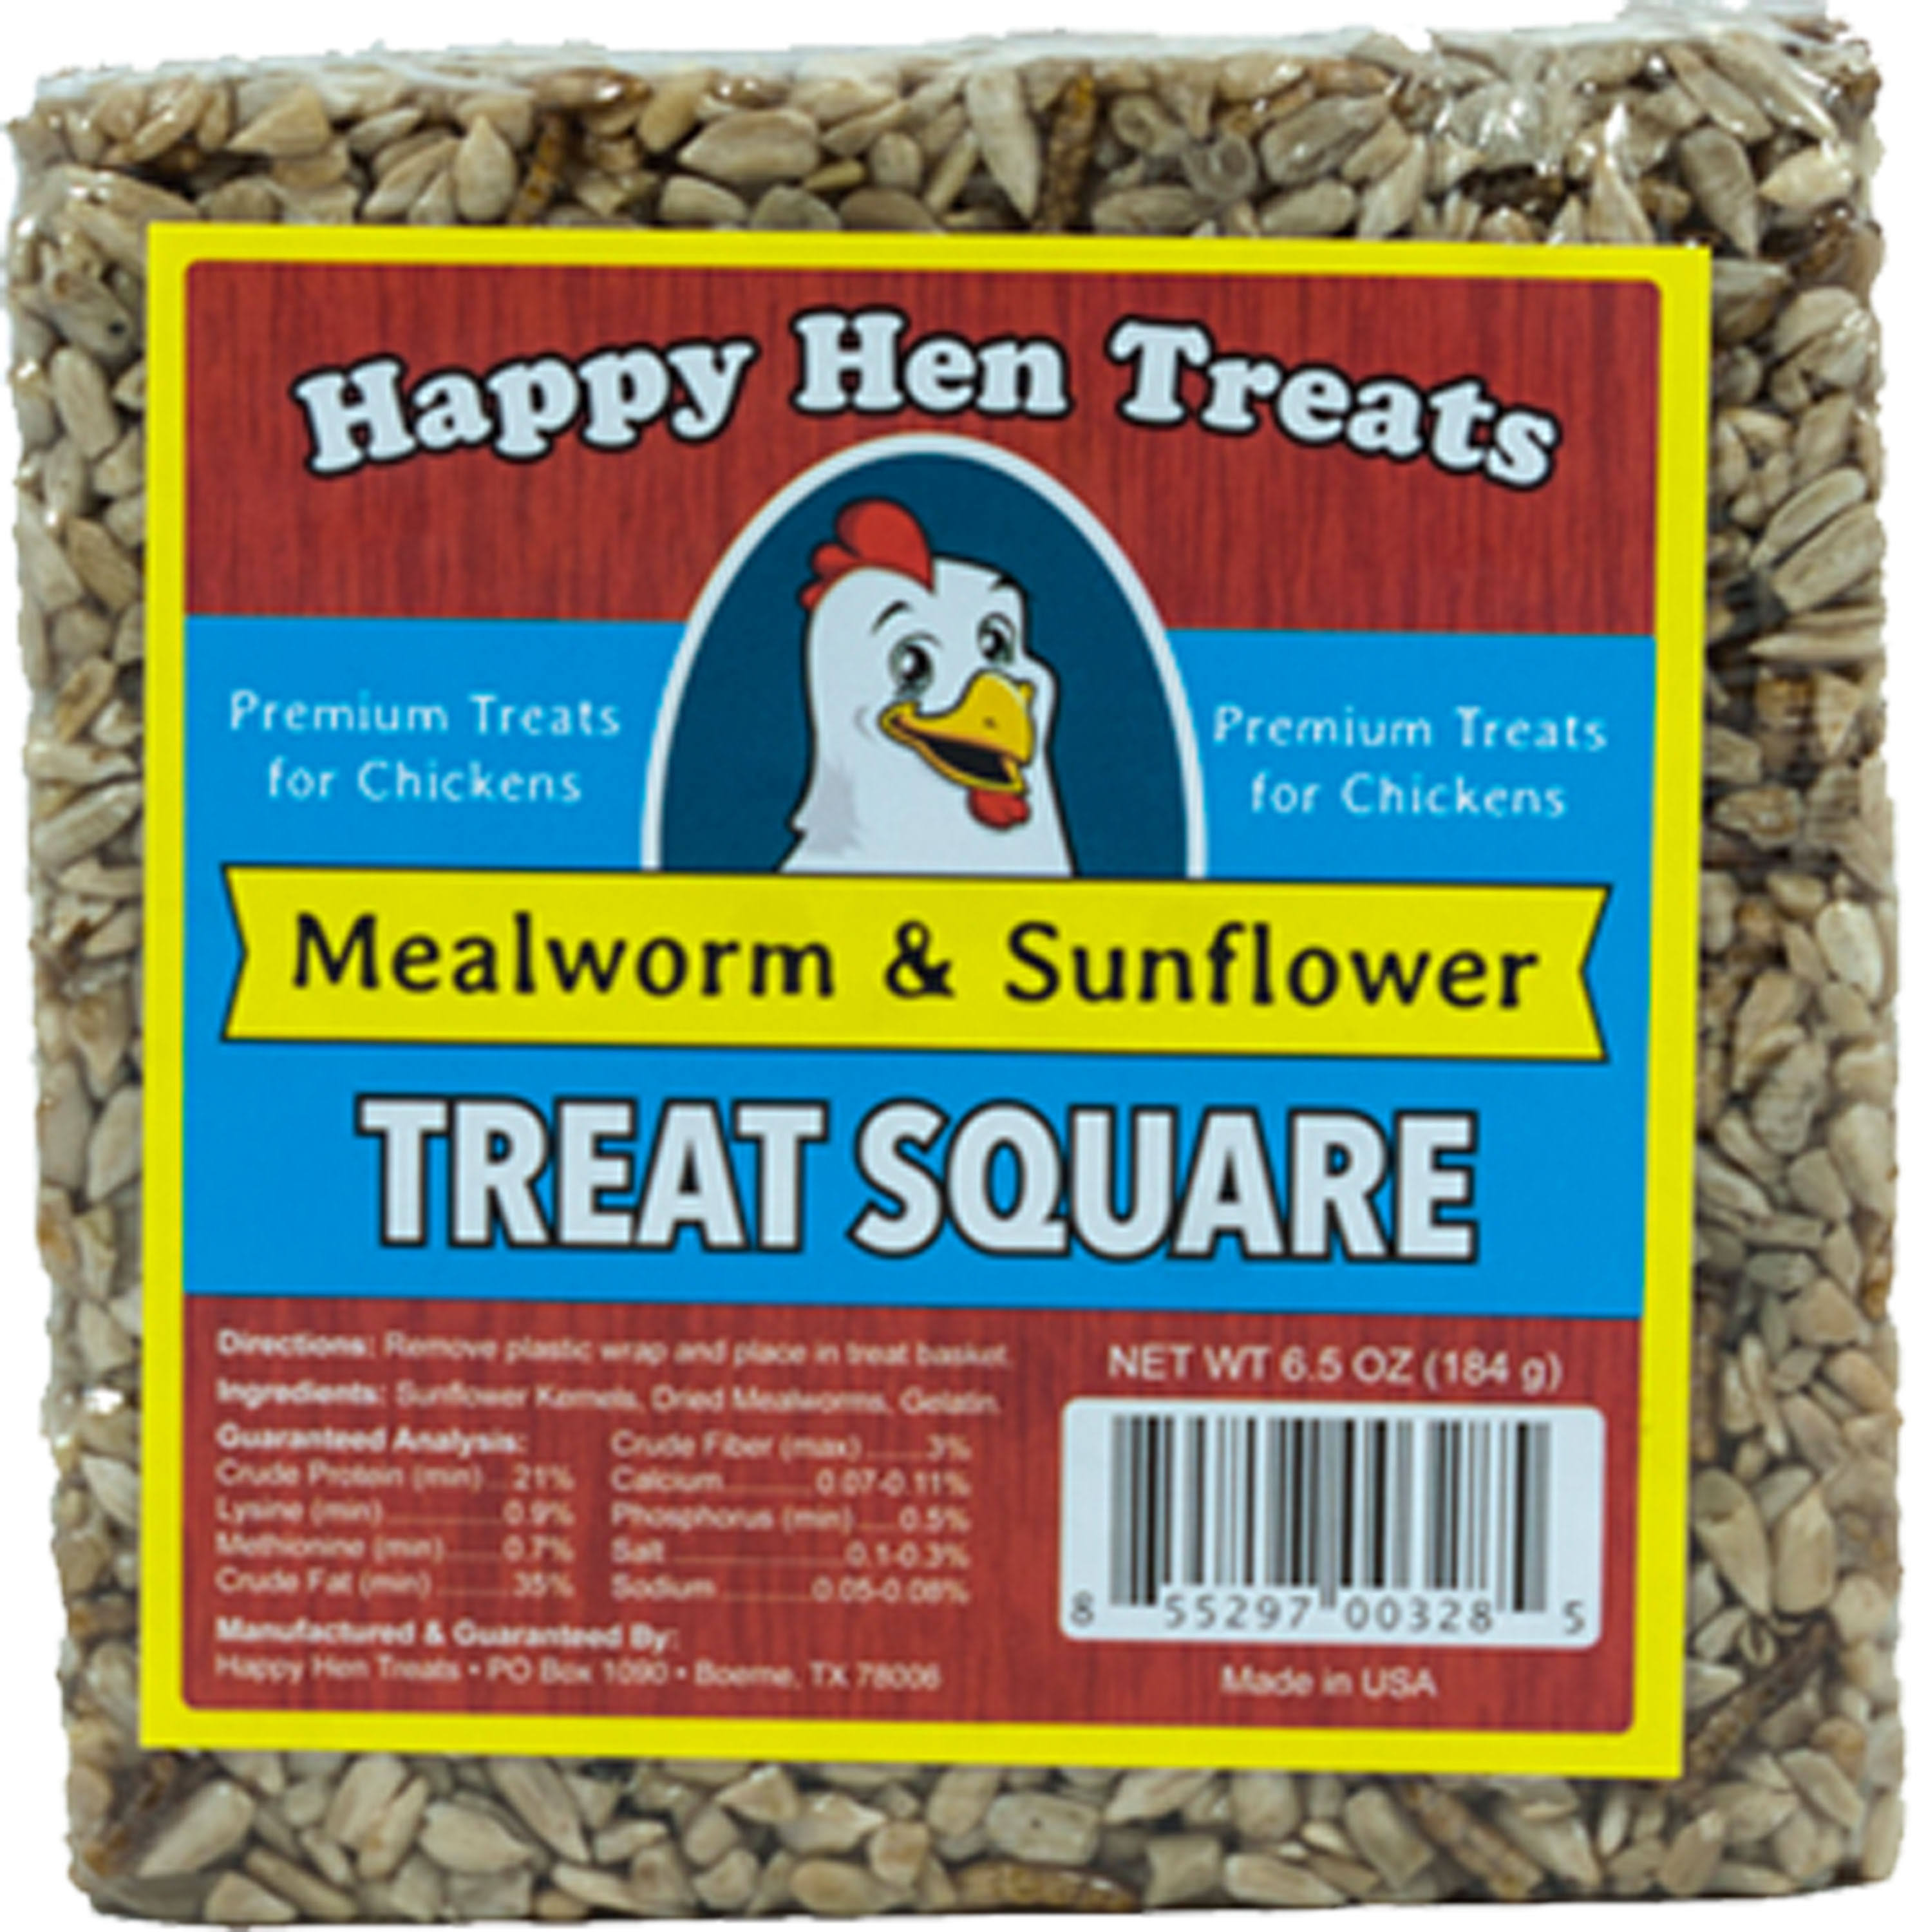 Happy Hen Treats Treat for Pets, Mealworm and Sunflower Treat Square